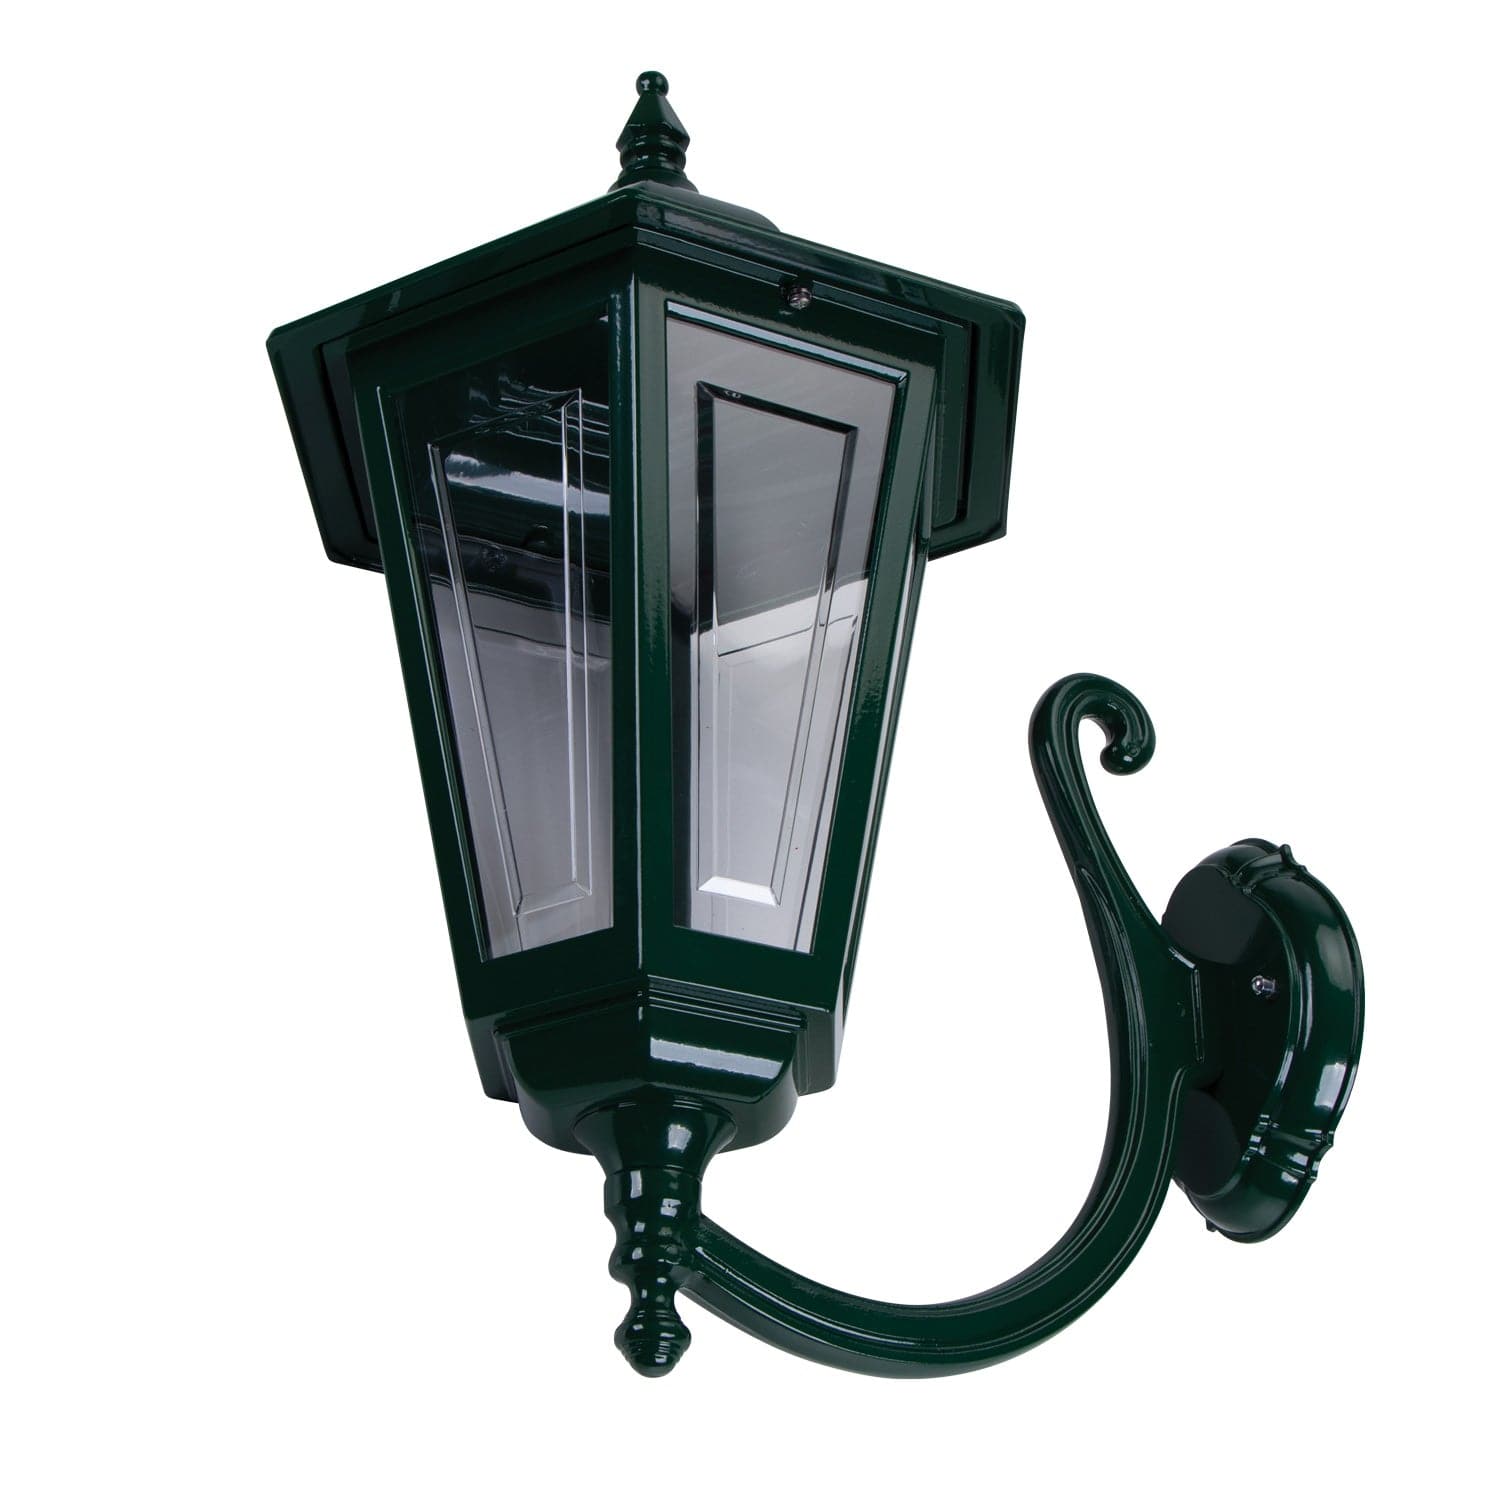 Domus Lighting Outdoor Wall Bracket GREEN TURIN-LARGE WALL BRACKET C-ARM UP B22 Lights-For-You 16136